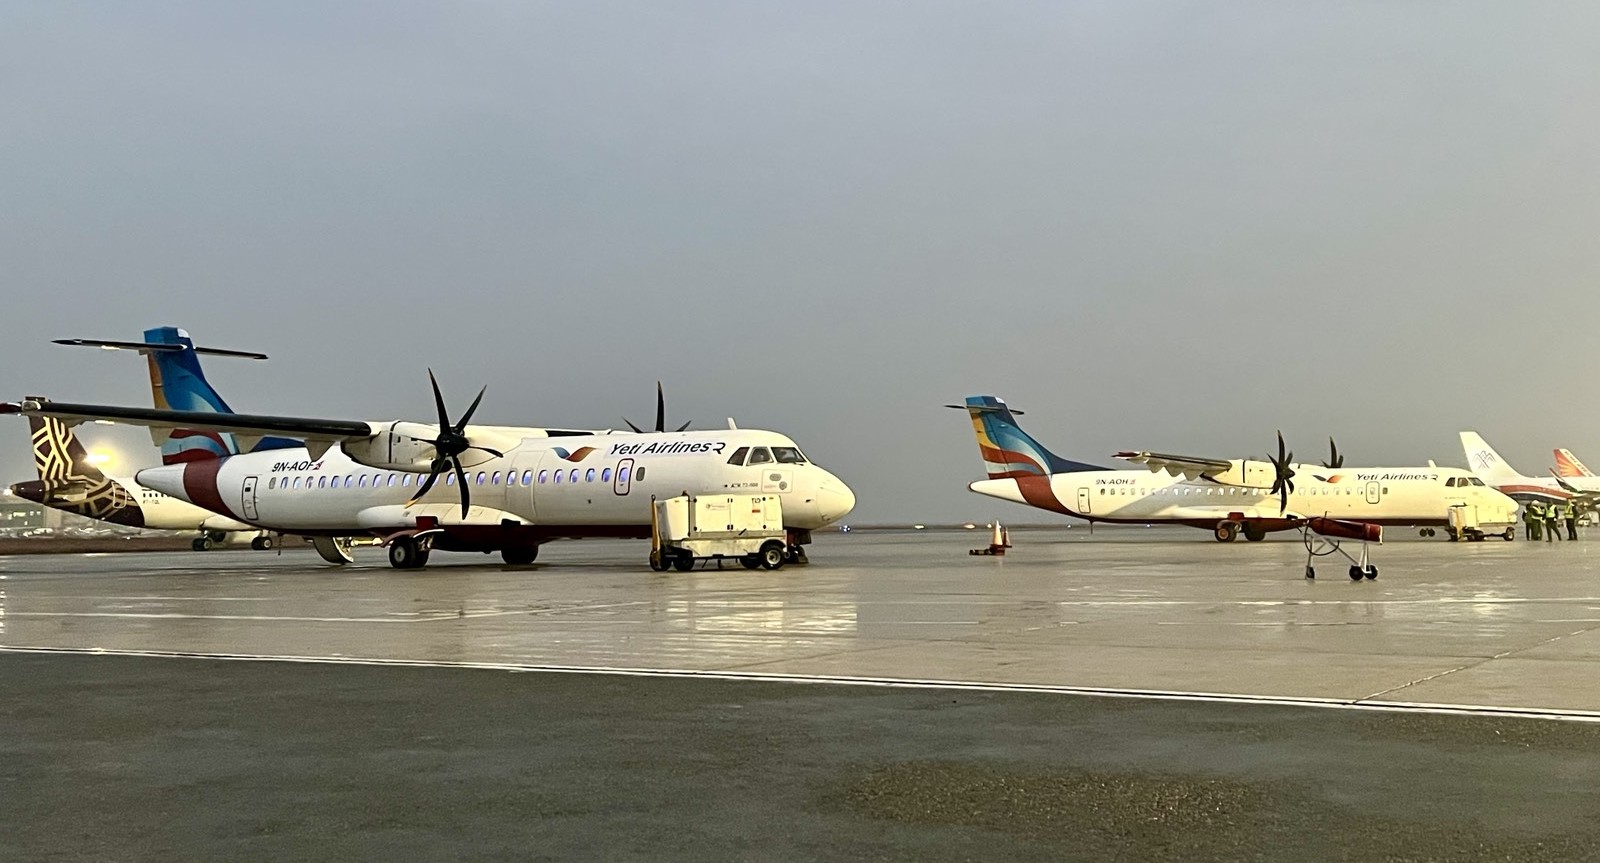 Yeti Airlines adds two ATR aircraft in its fleet